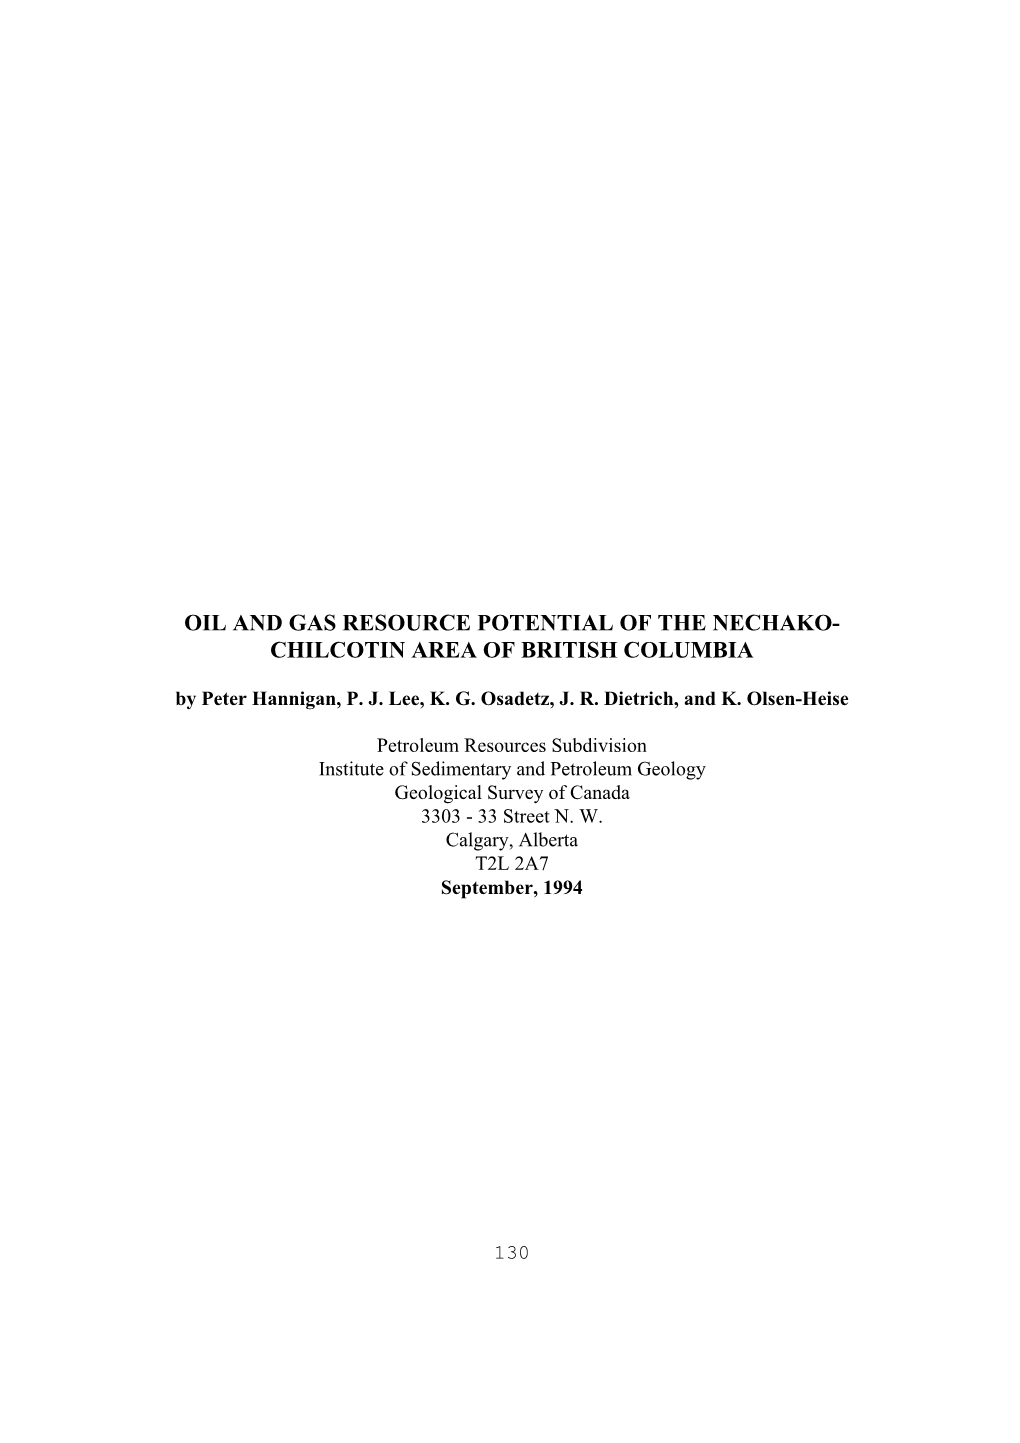 OIL and GAS RESOURCE POTENTIAL of the NECHAKO- CHILCOTIN AREA of BRITISH COLUMBIA by Peter Hannigan, P